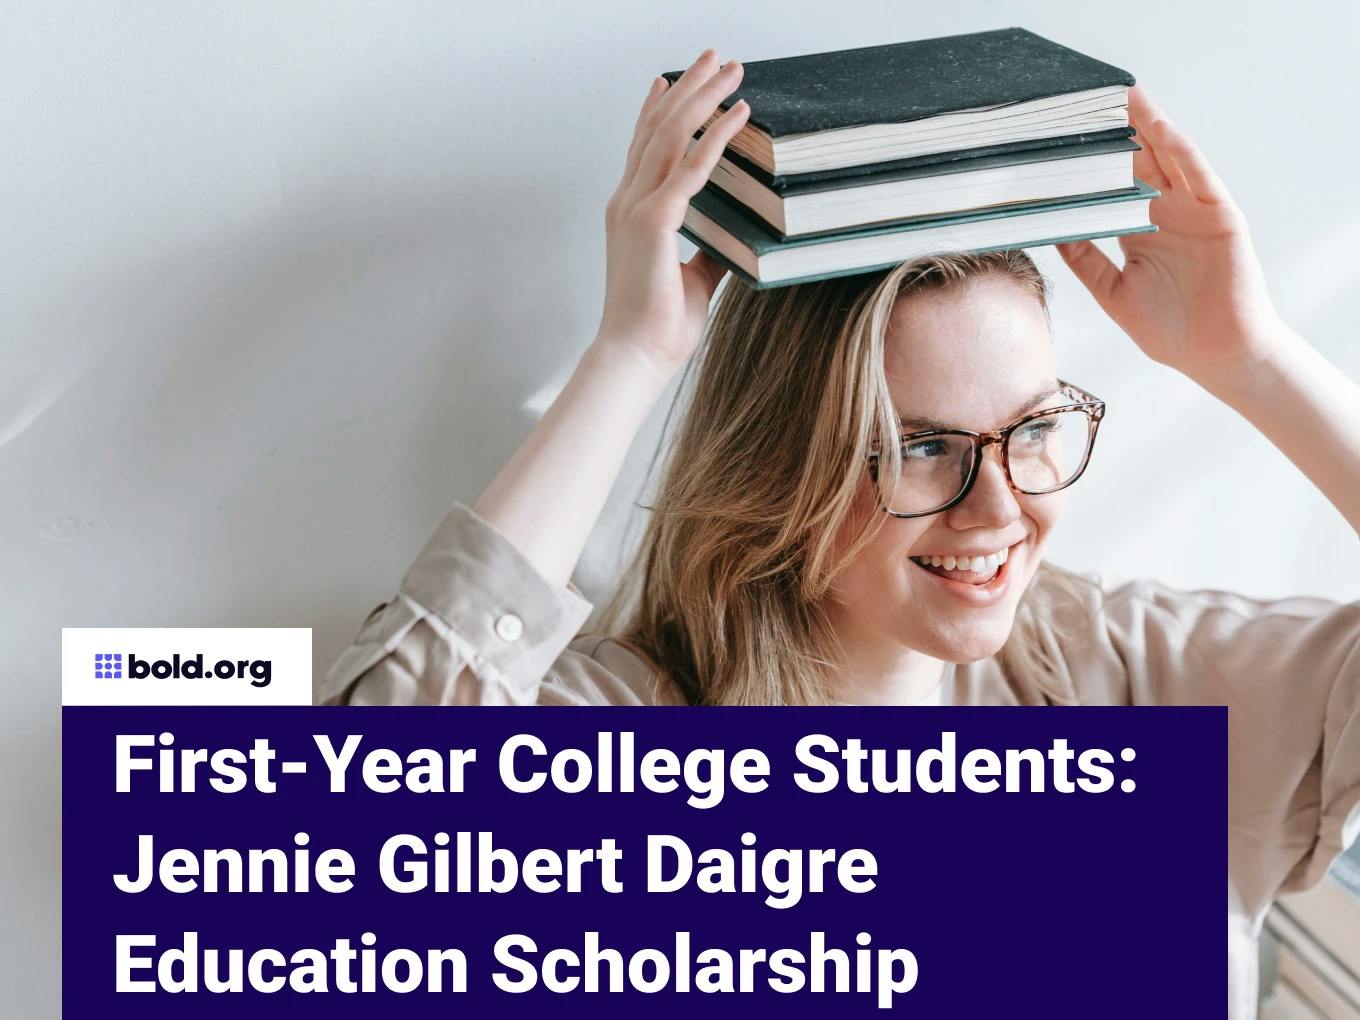 First-Year College Students: Jennie Gilbert Daigre Education Scholarship